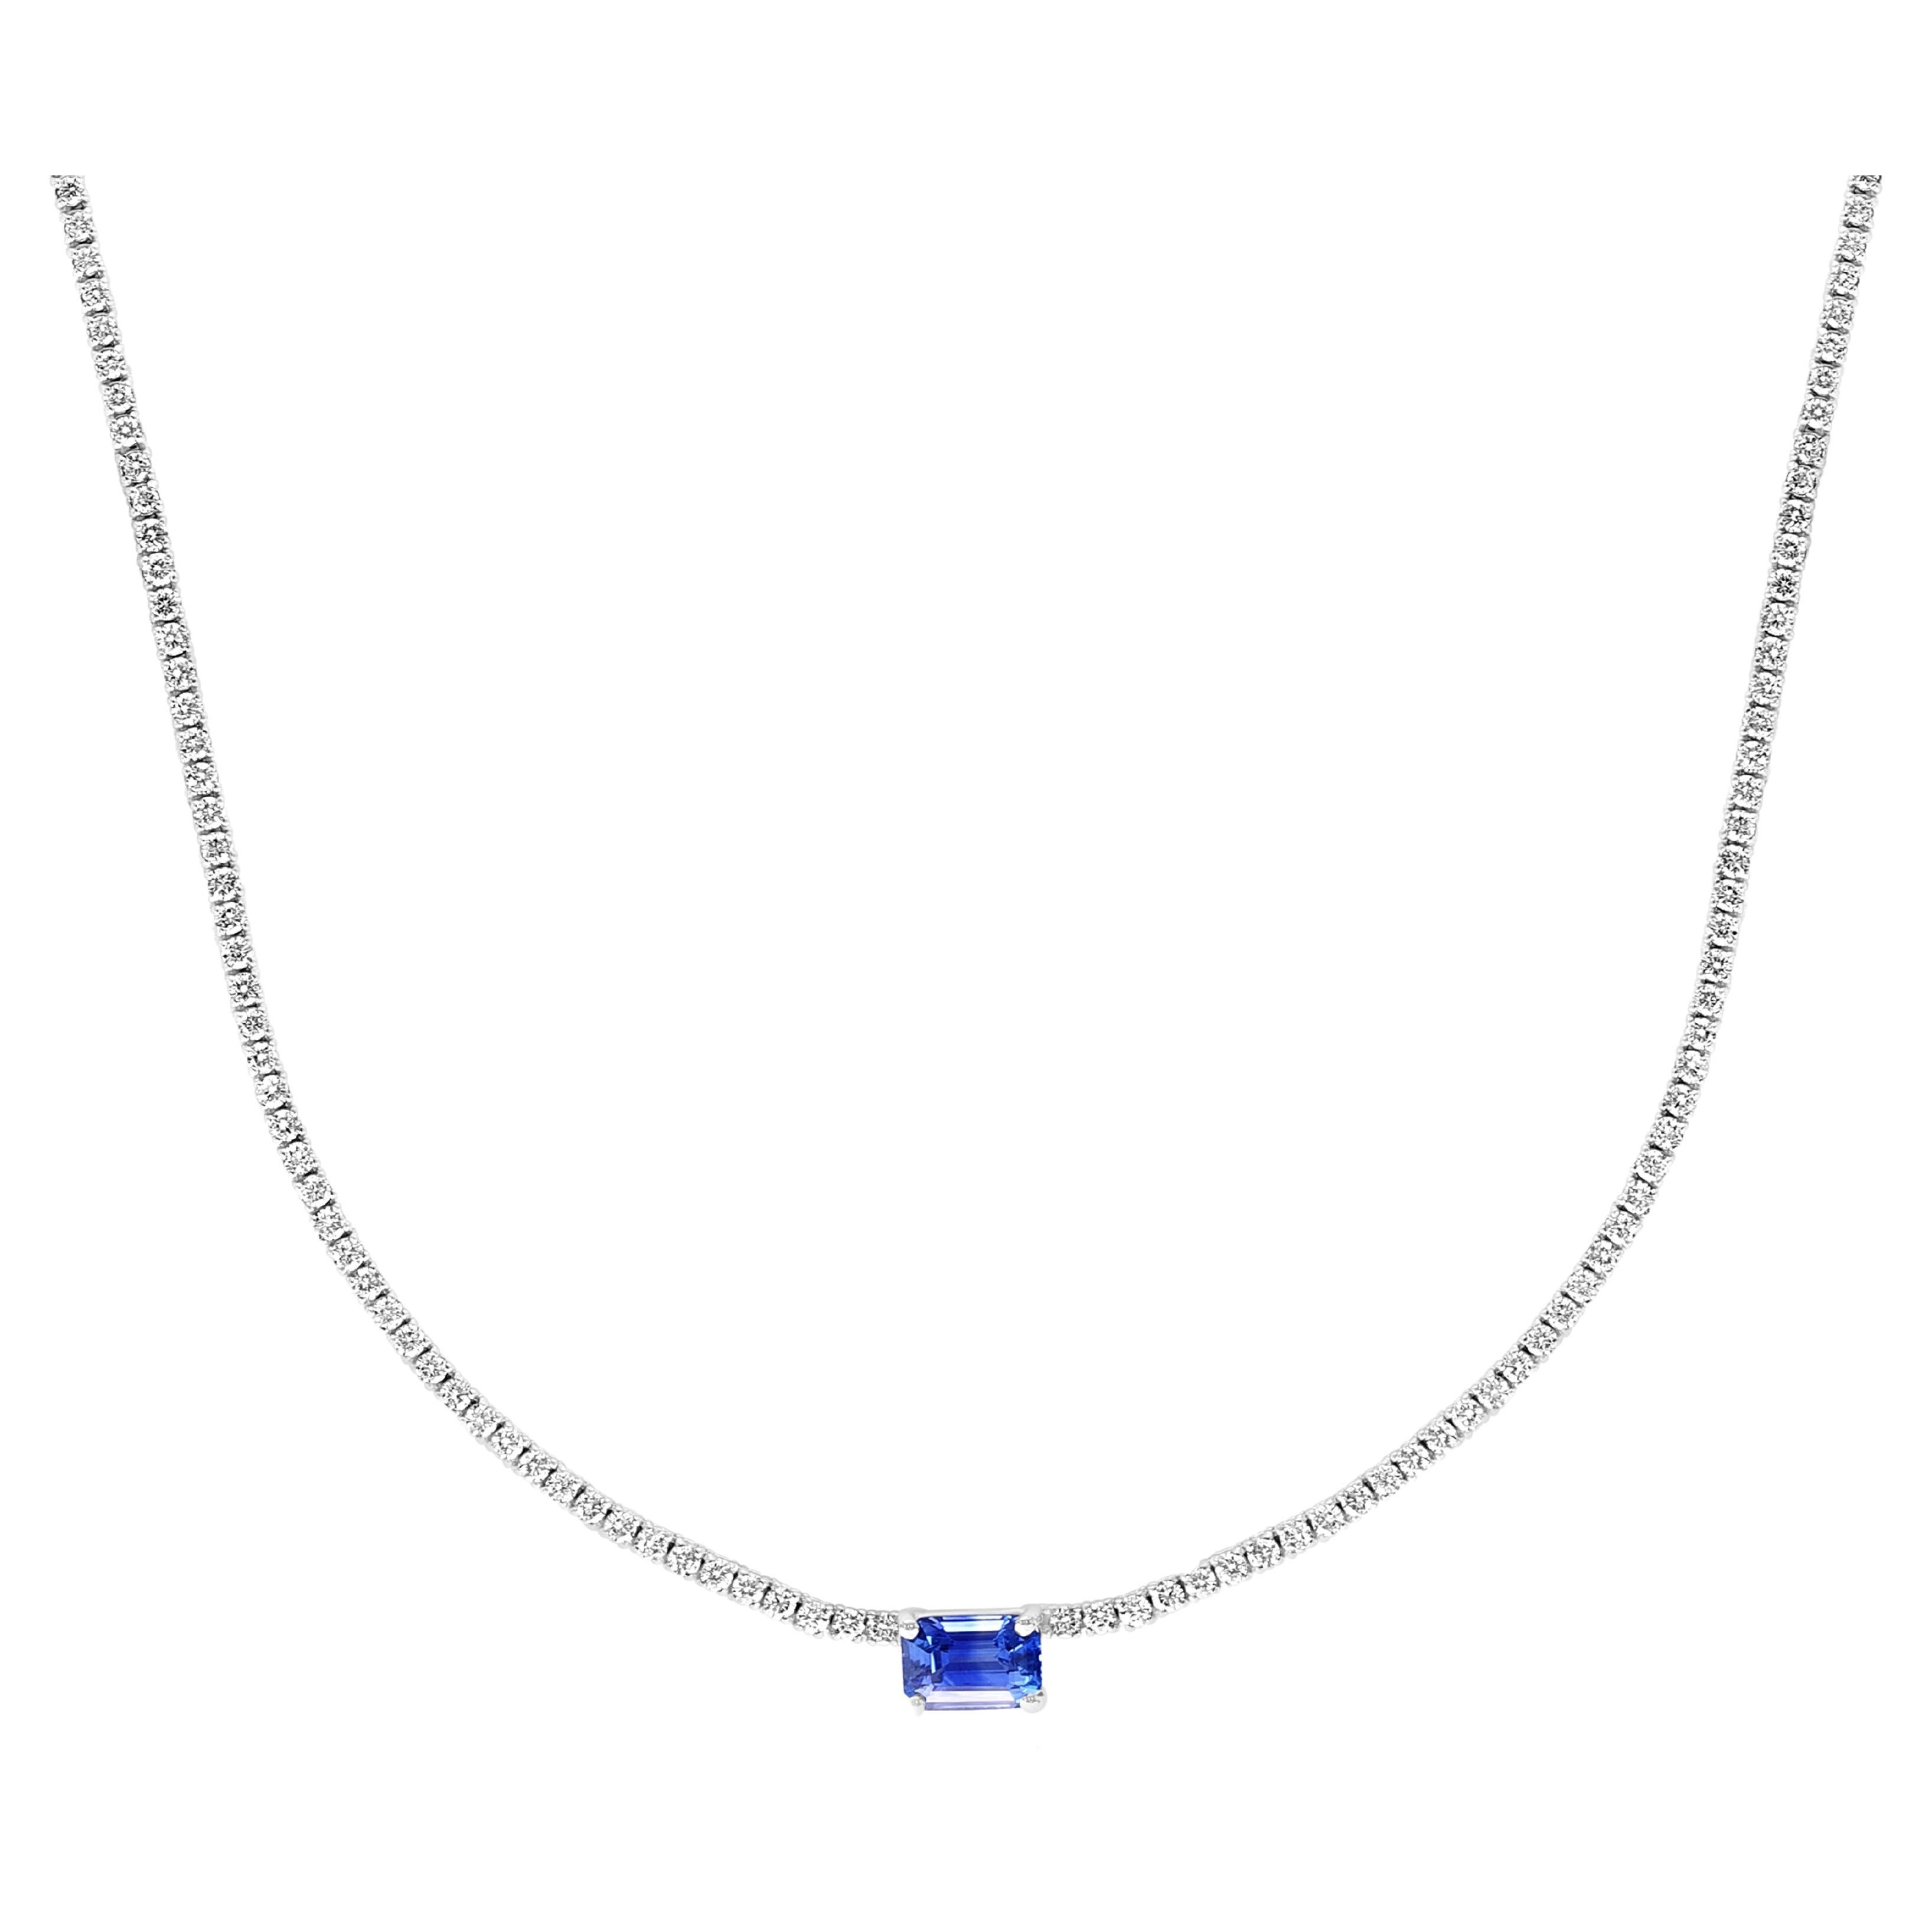 1.18 Carat Emerald cut Sapphire and Diamond Tennis Necklace in 14K White Gold